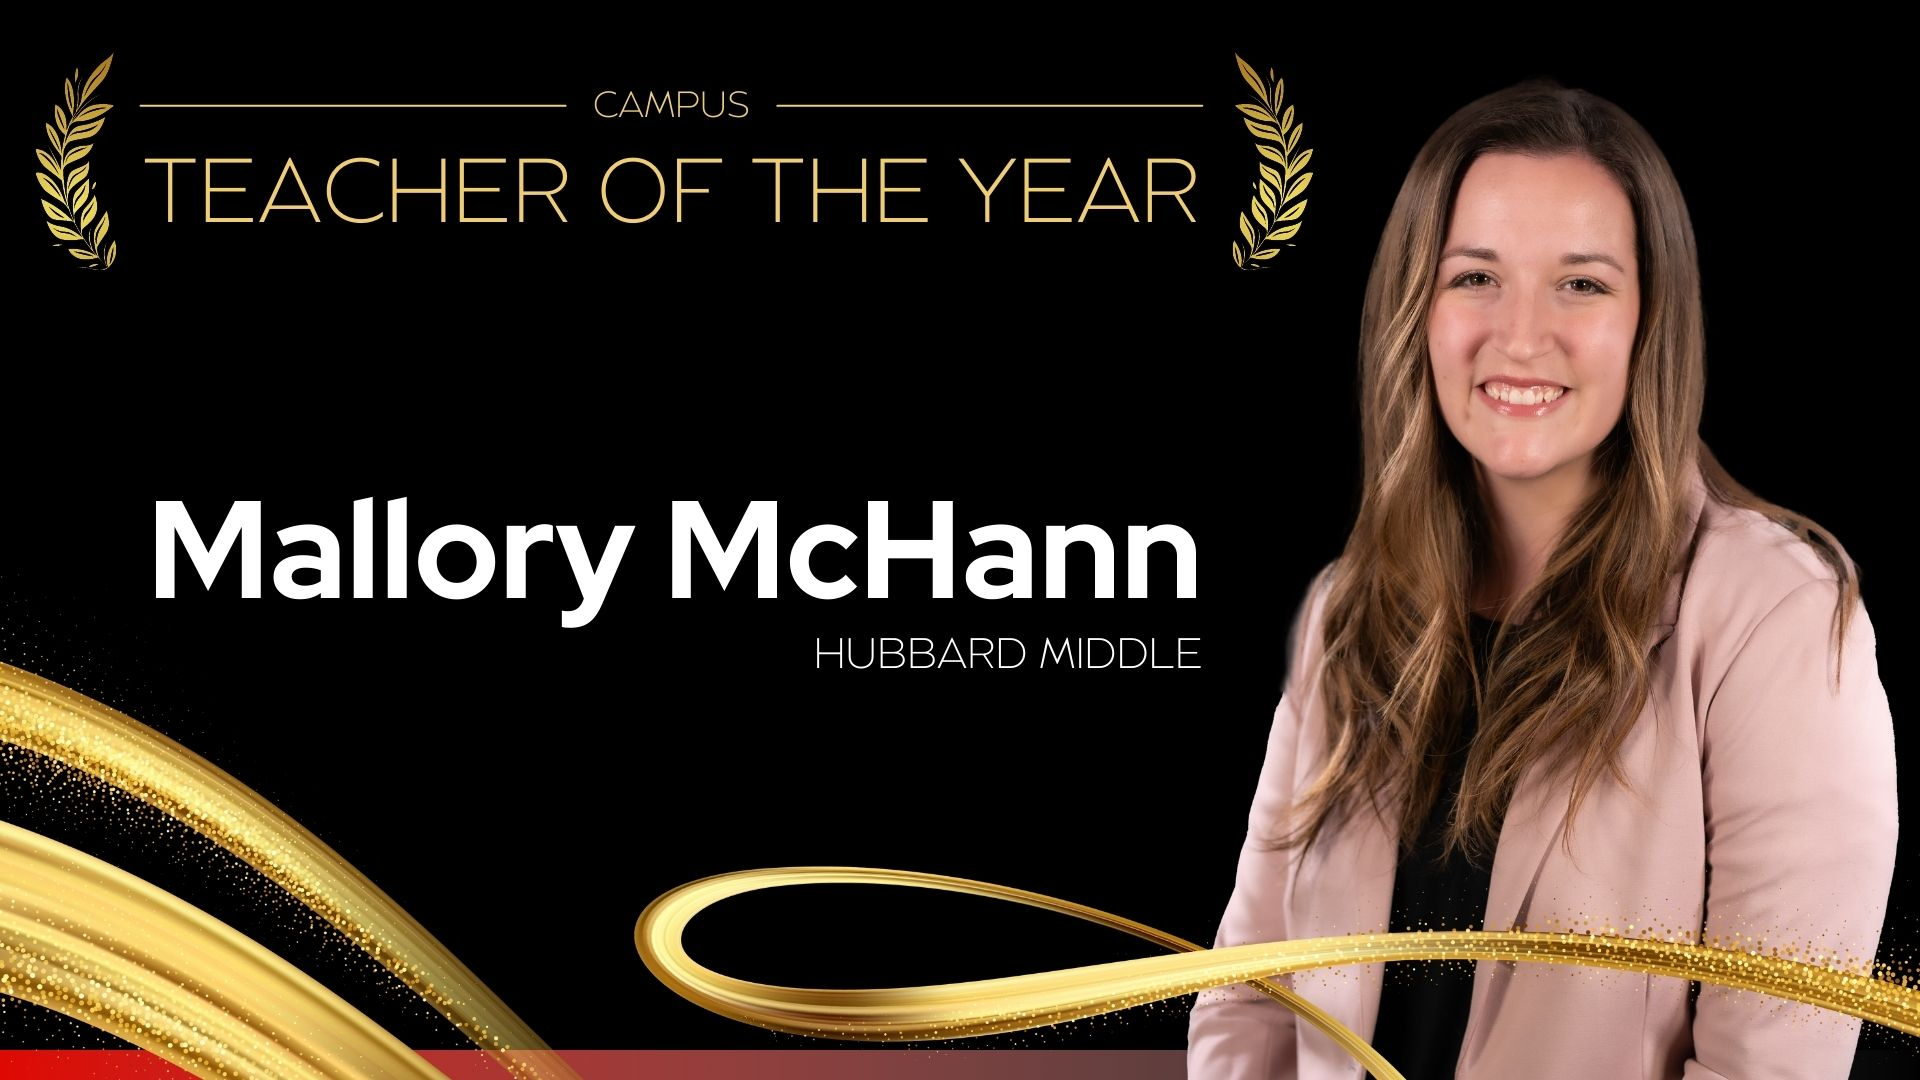 Campus Teacher of the Year Hubbard Middle School - Mallory McHann